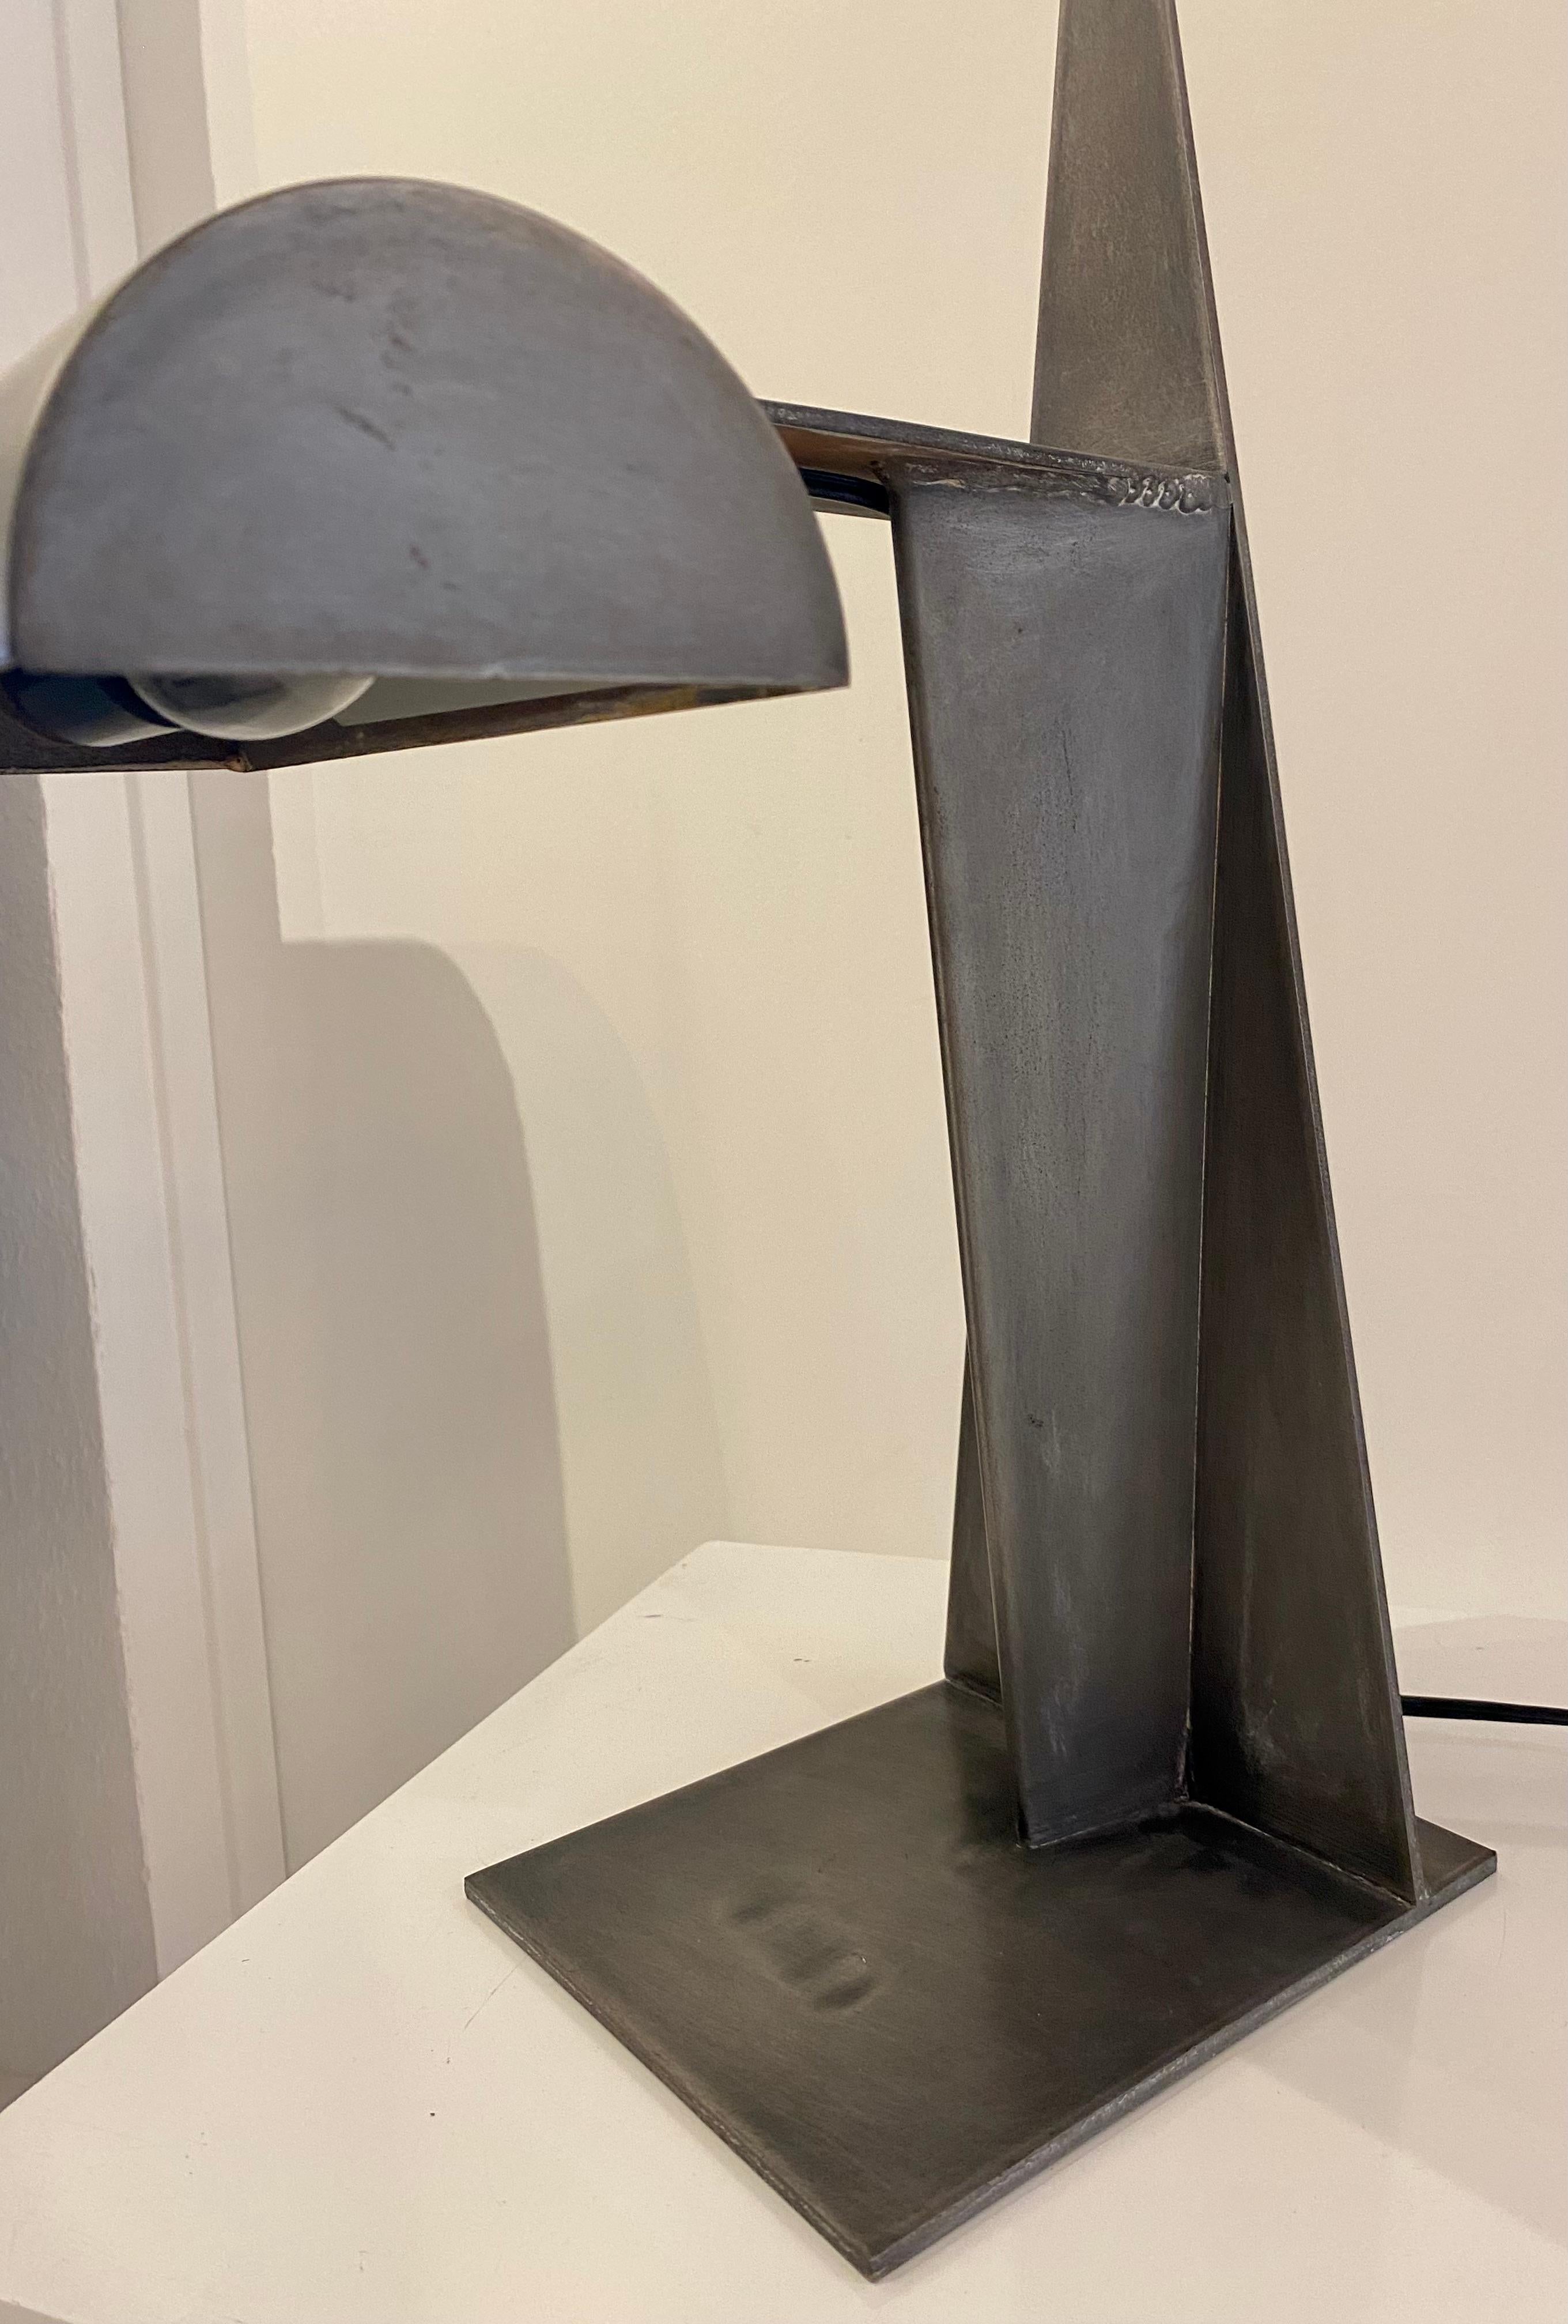 Brutalist Metal Task Lamp in the Style of Gino Sarfatti and Rodchenko For Sale 5